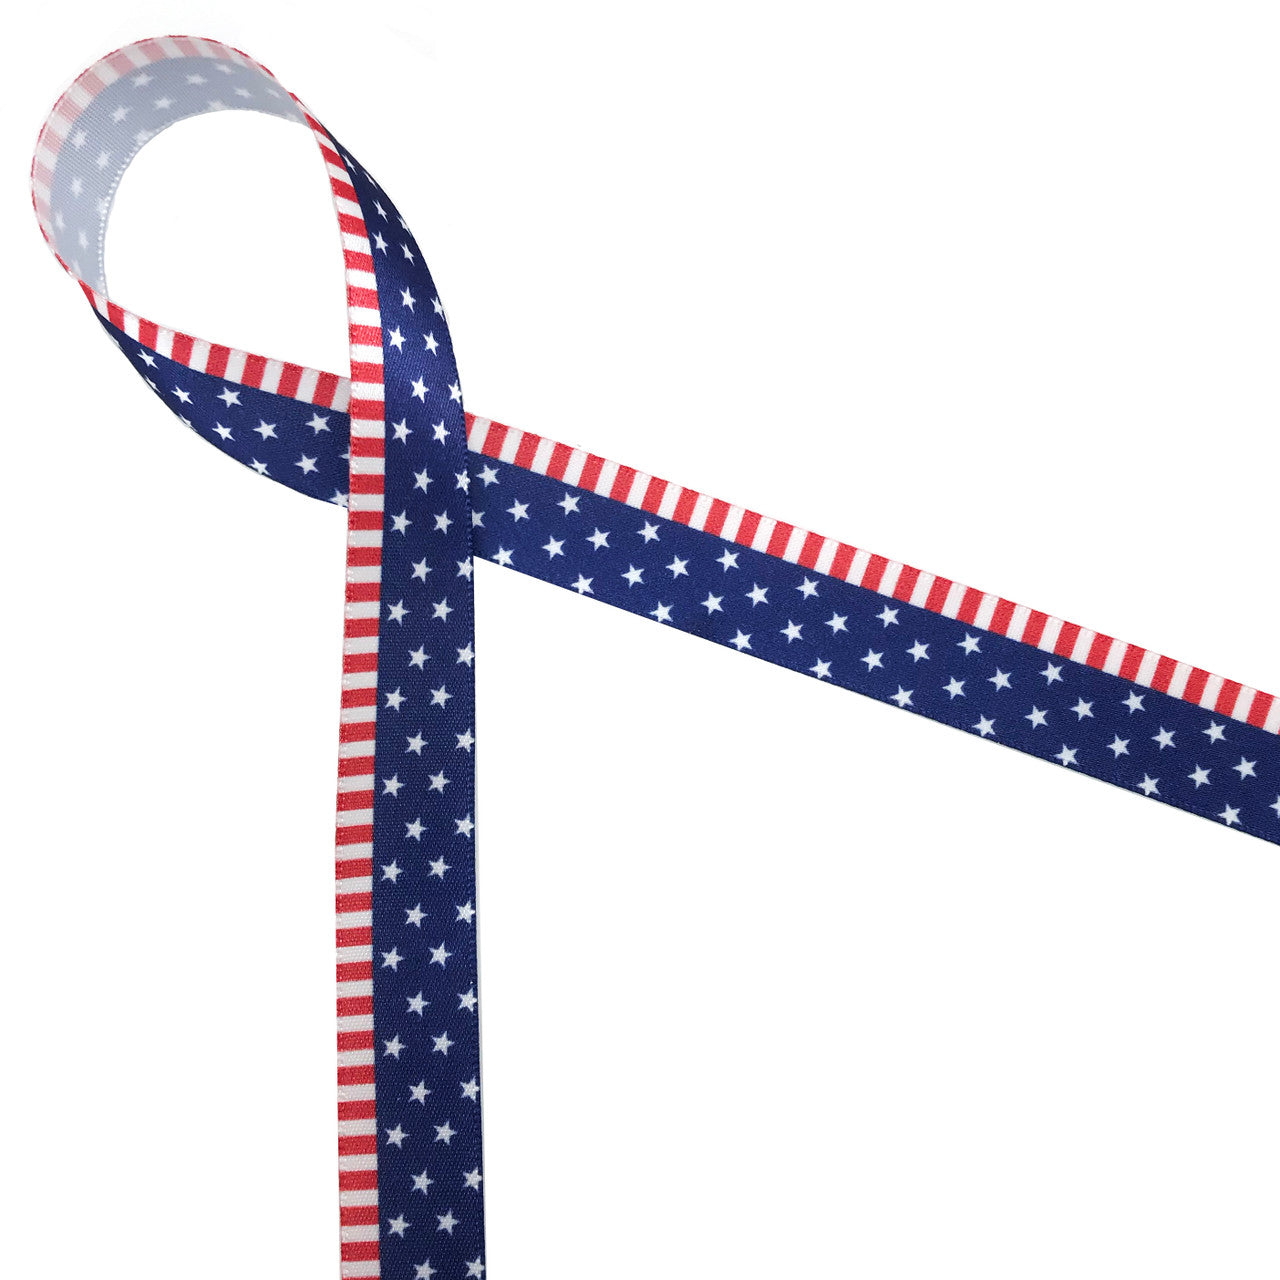 Patriotic border print featuring stripes of red and white on one border and white stars on a navy blue backgound on the other. This ribbon is ideal for your Fourth of July celebrations!